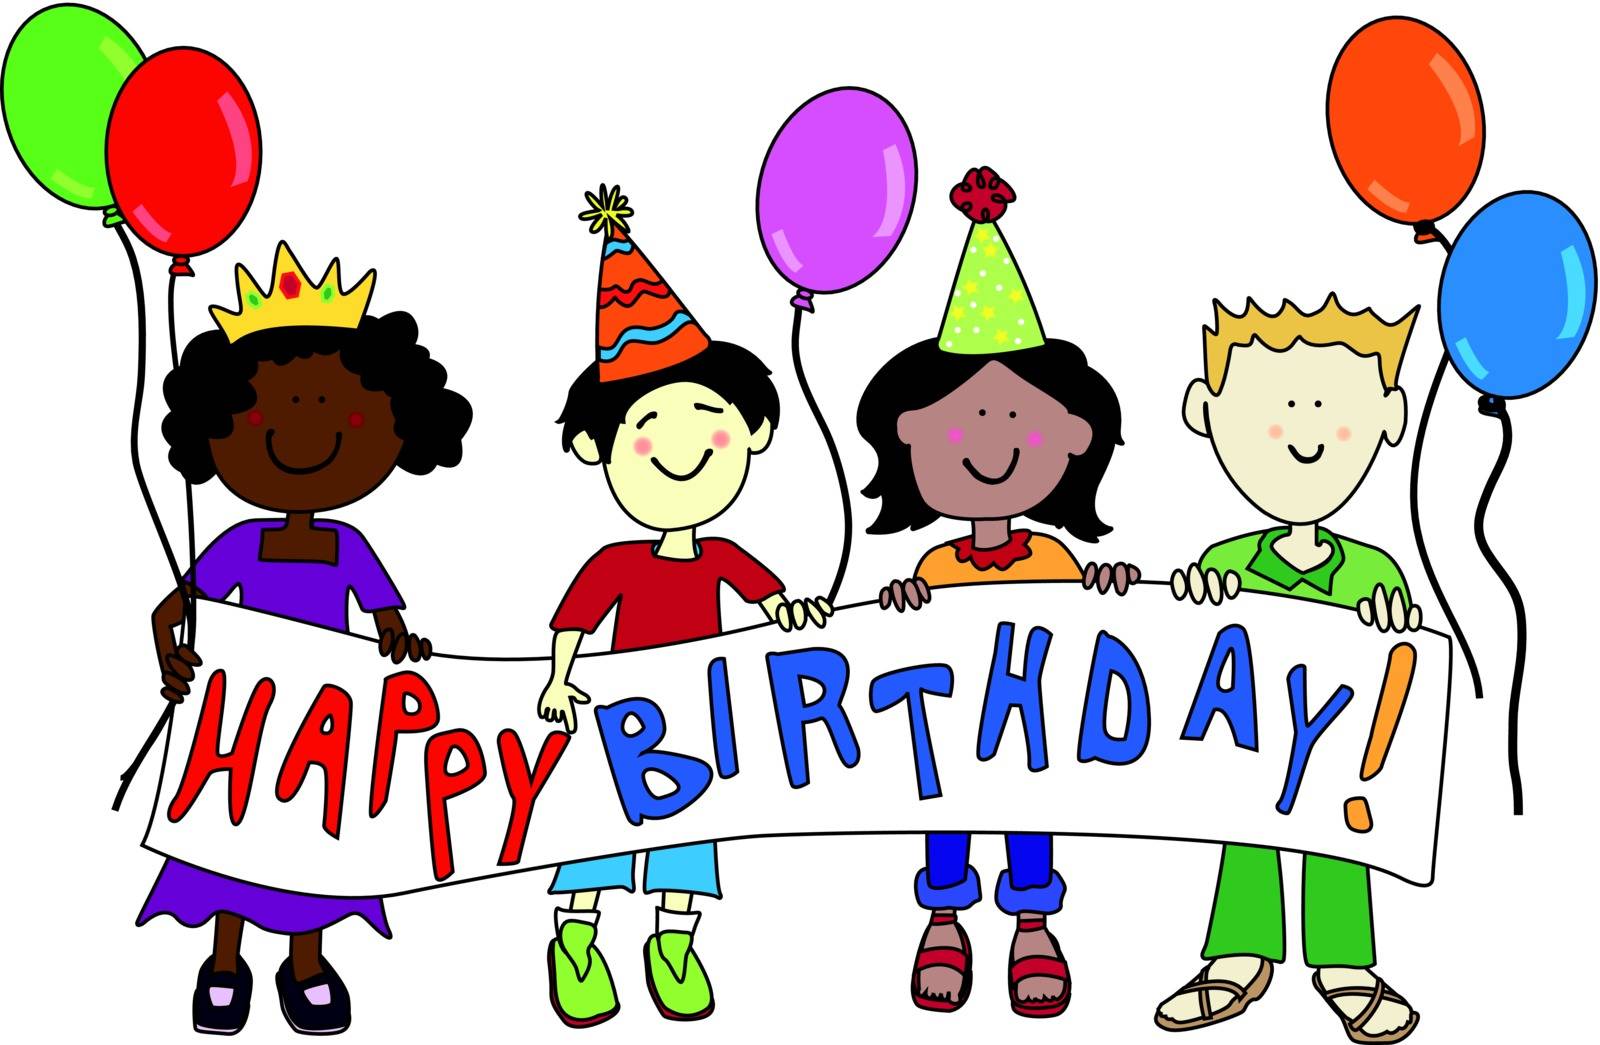 Multicultural kids with Birthday banner by Mirage3